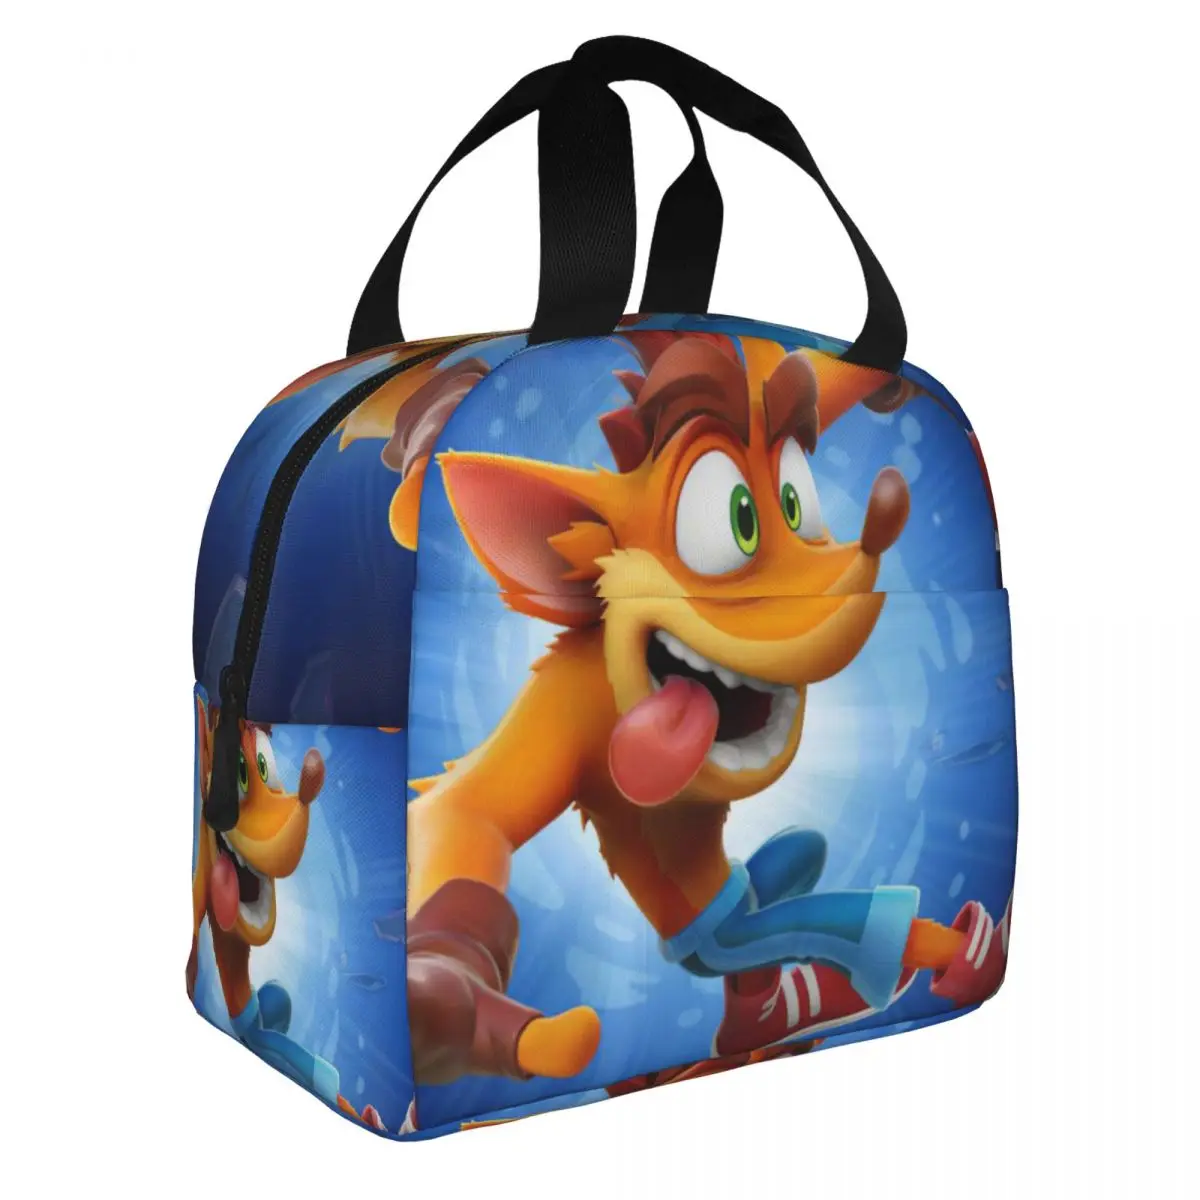 Crash Bandicoot 40,Its About Time Lunch Bento Bags Portable Aluminum Foil thickened Thermal Cloth Lunch Bag for Women Men Boy